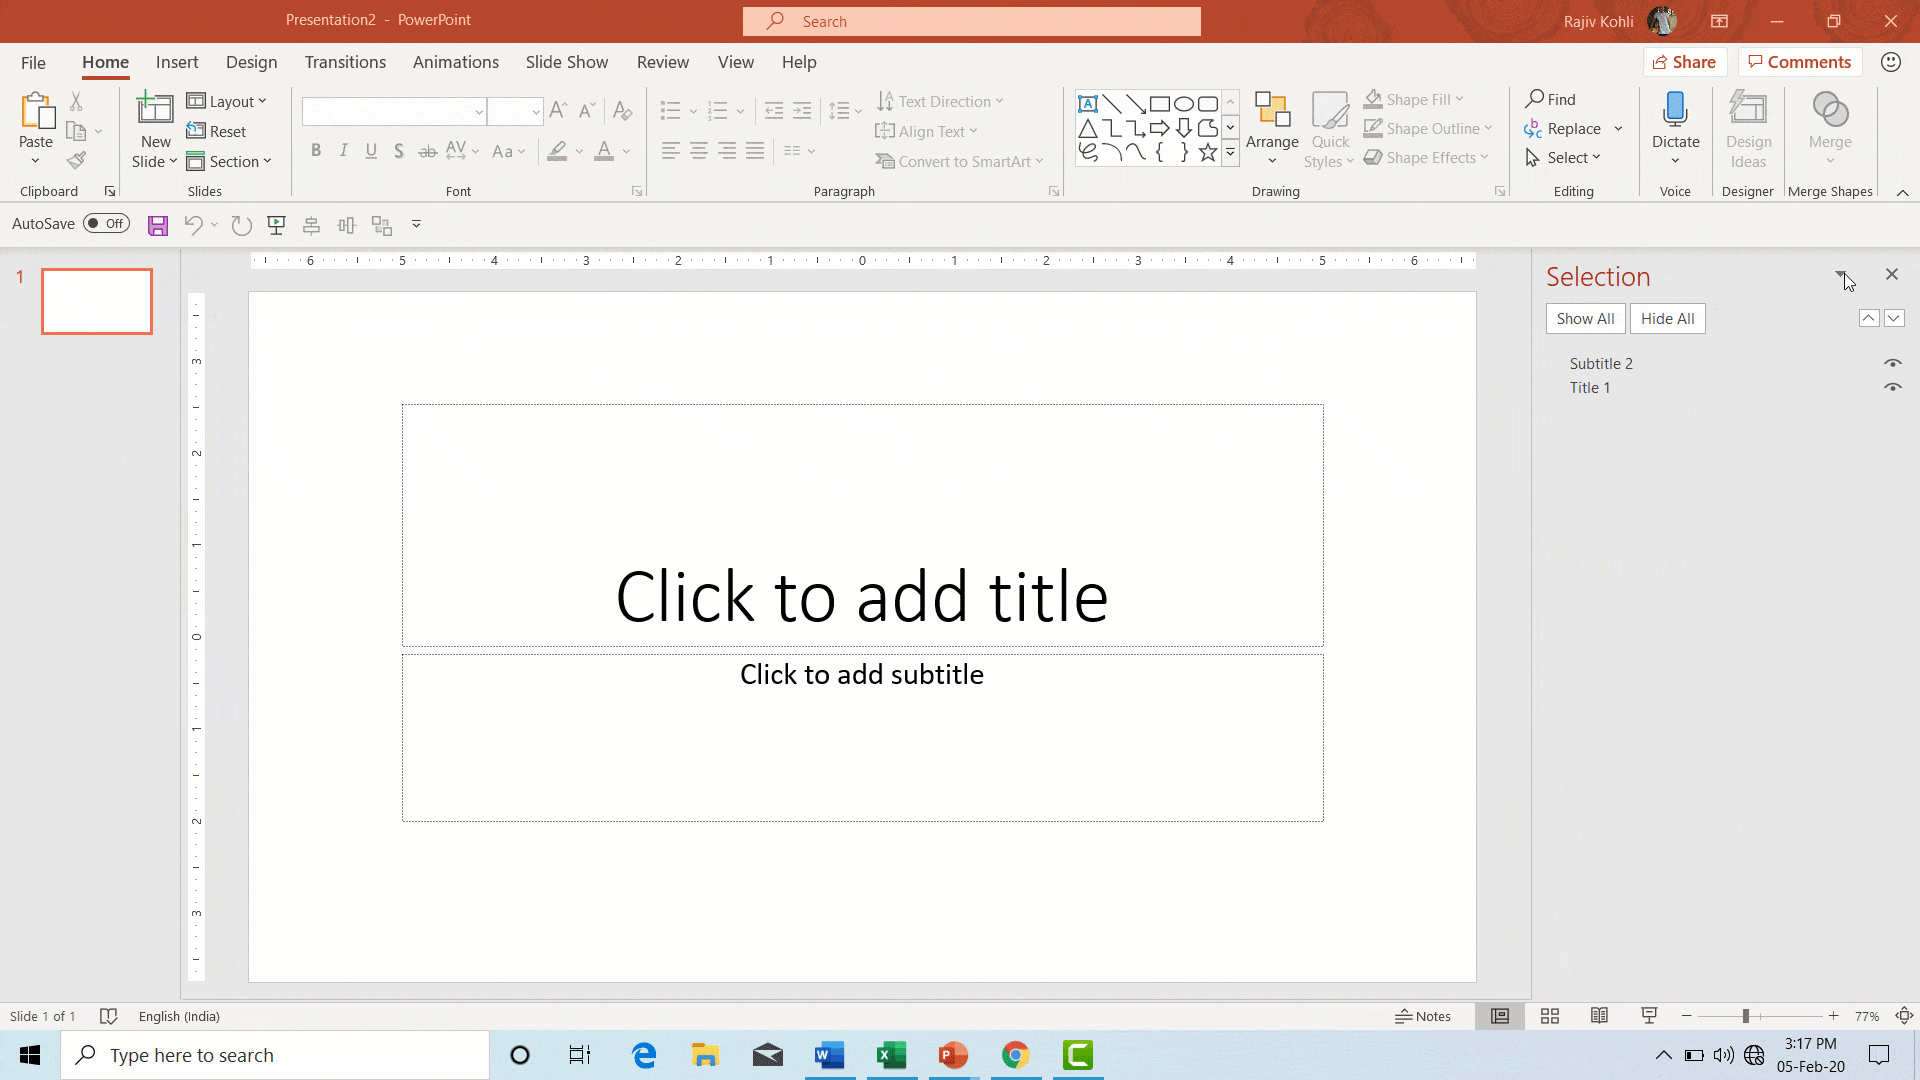 How To Use Selection Pane in PowerPoint, Word, and Excel Tutorial